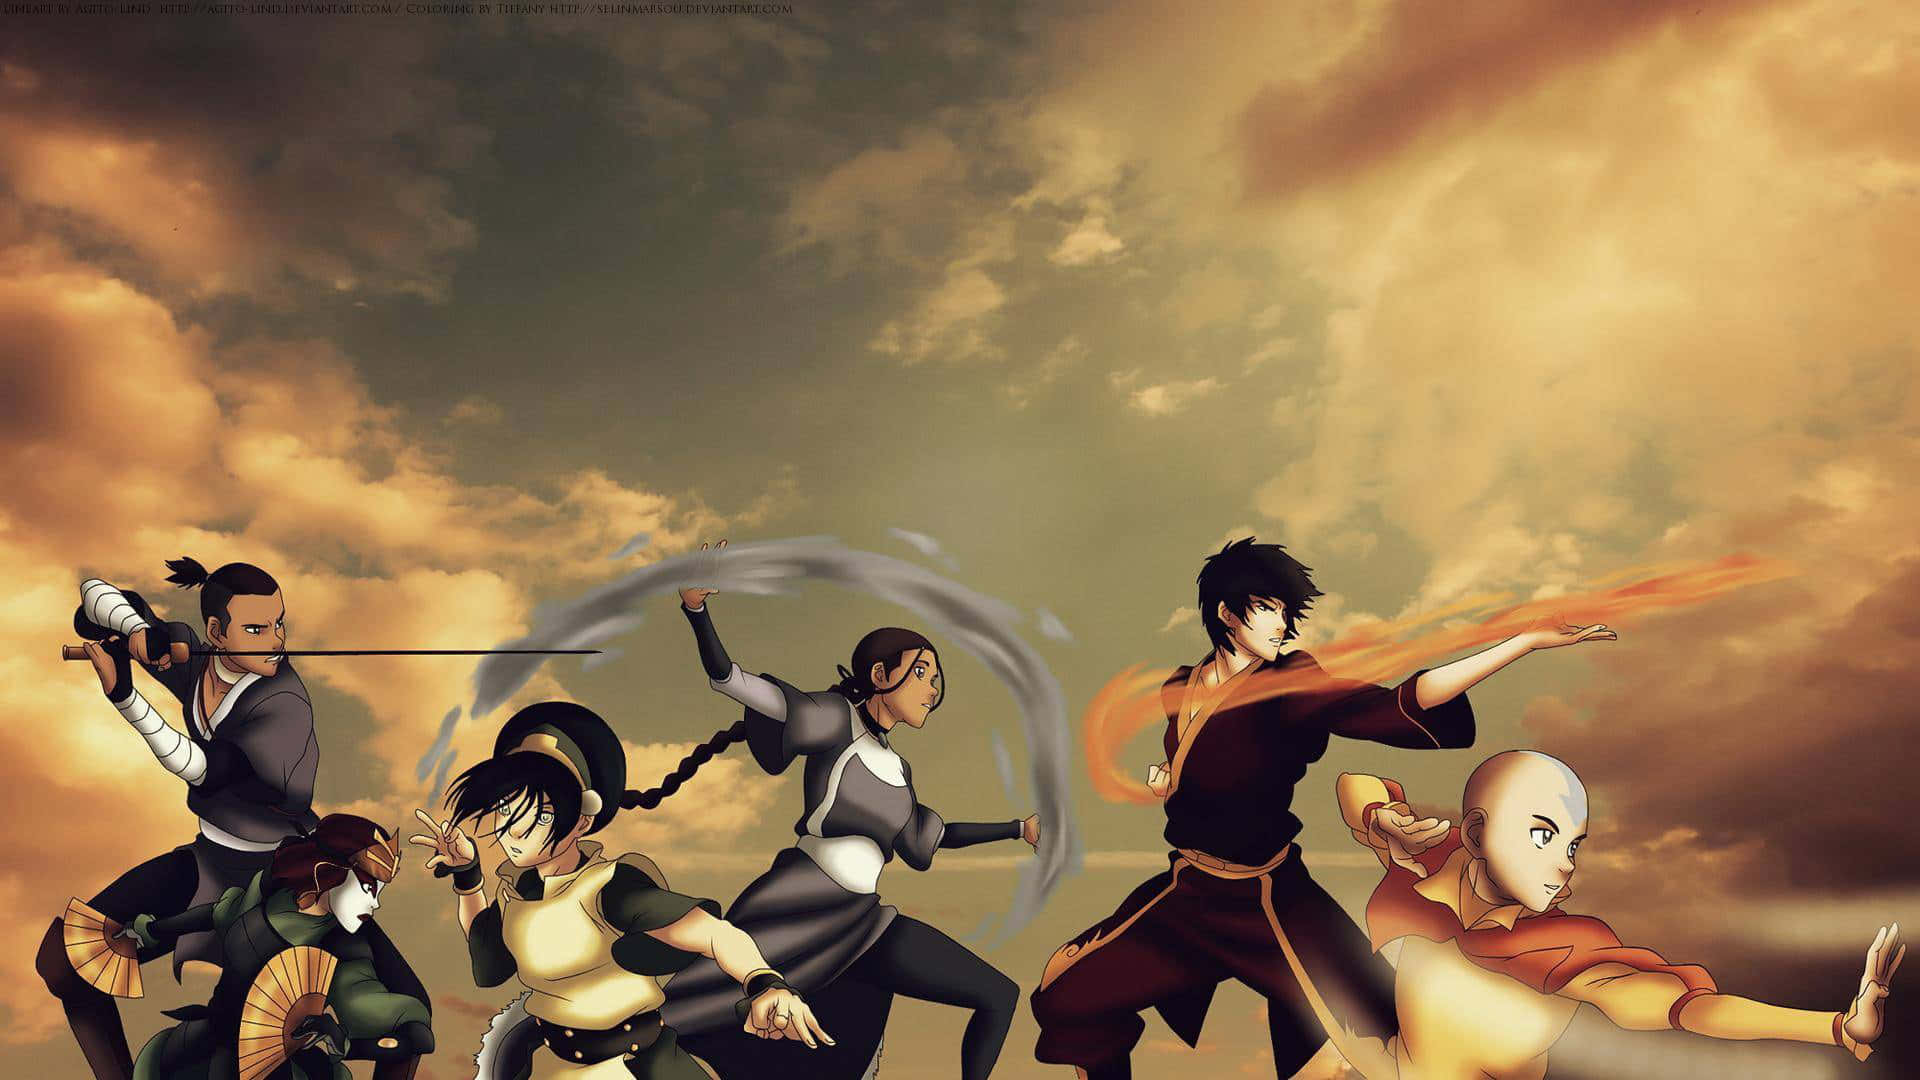 “The Last Airbender Unites All Four Nations”